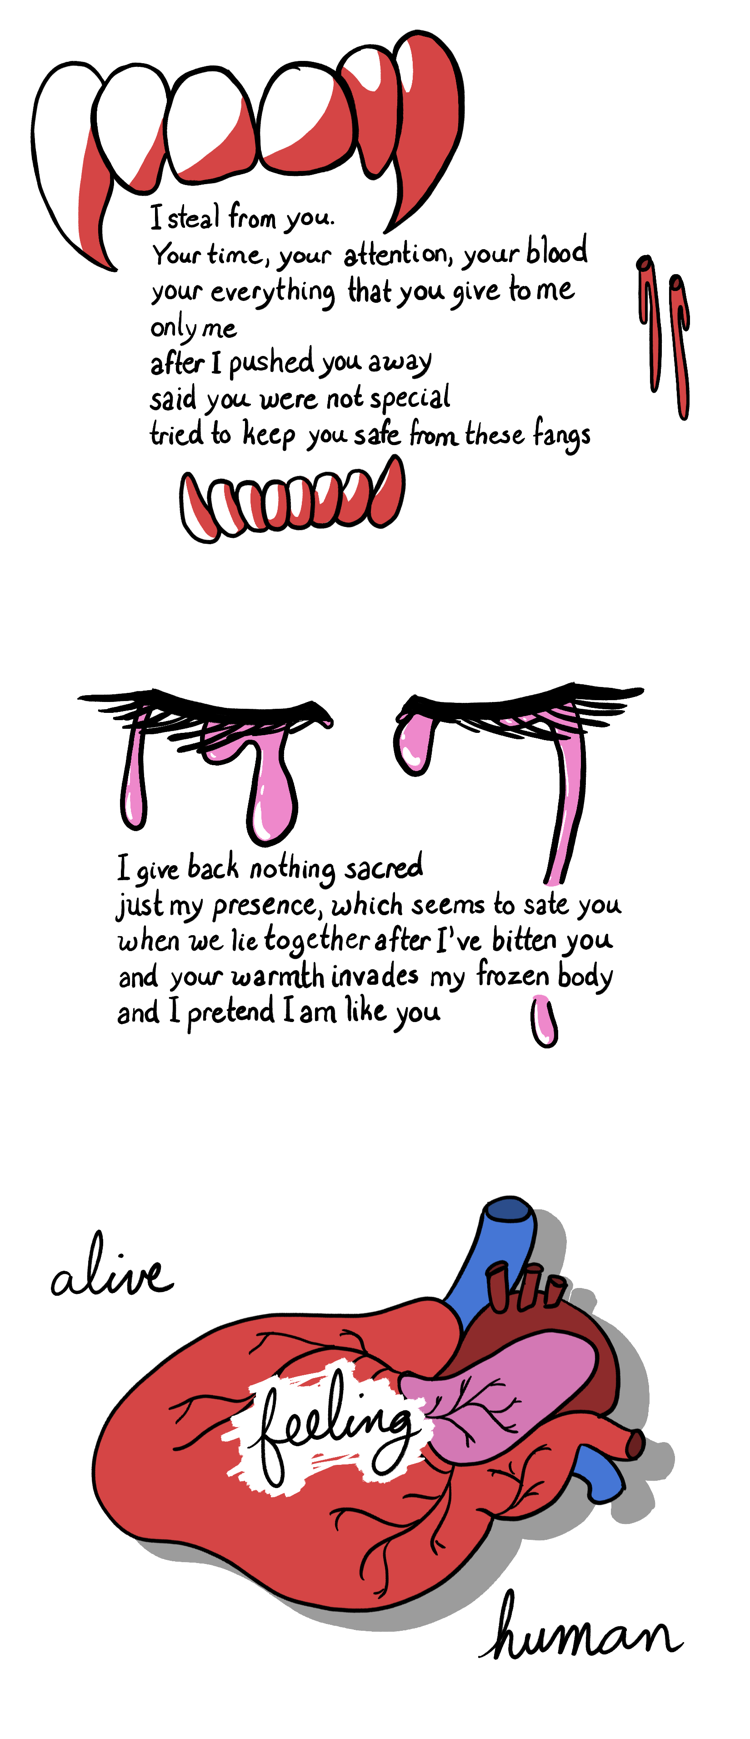 A poem split into three sections with digital art around the words. The first section is being bitten by vampire fangs with dark red shadows. There is a bleeding bite mark to the right. The second section has a pair of closed eyes crying shiny pink tears. The final section has a stylized human heart behind the word 'human.'